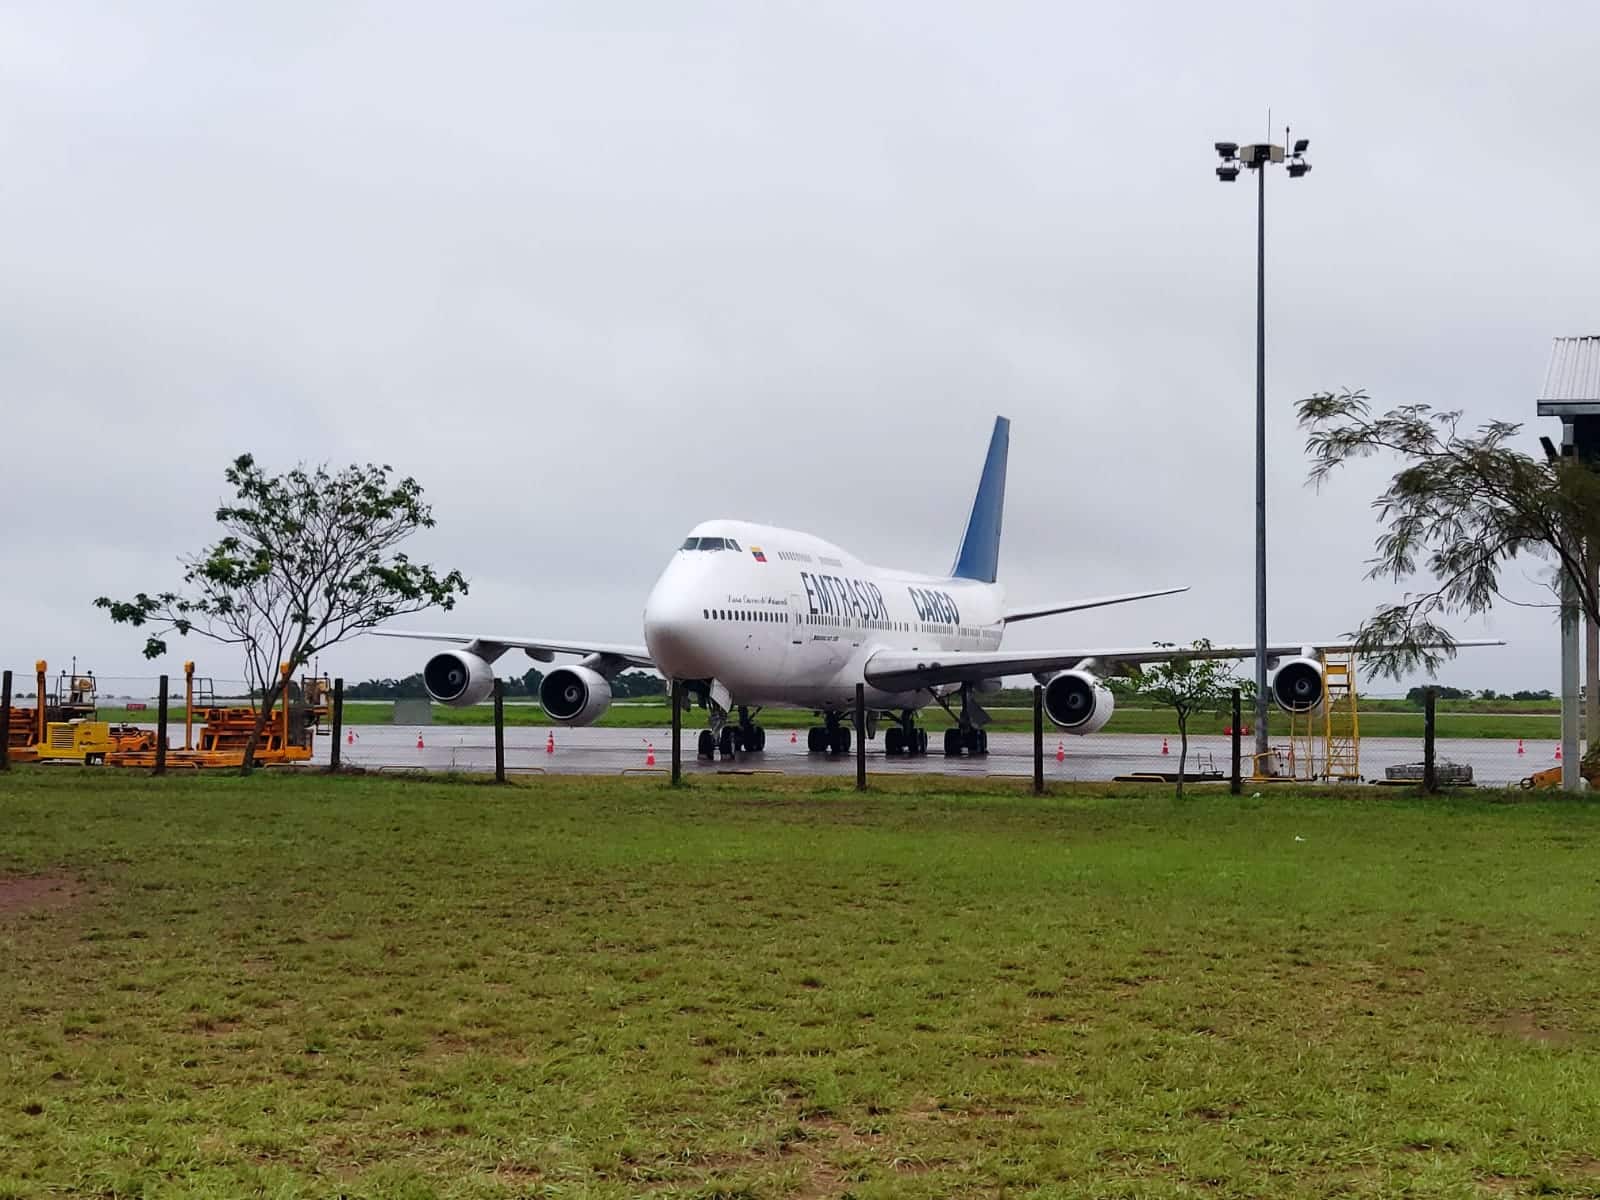 The EMTRASUR Boeing 747-300 photographed in Ciudad del Este, Paraguay, a few months before its controversial detention in Argentina. File photo.